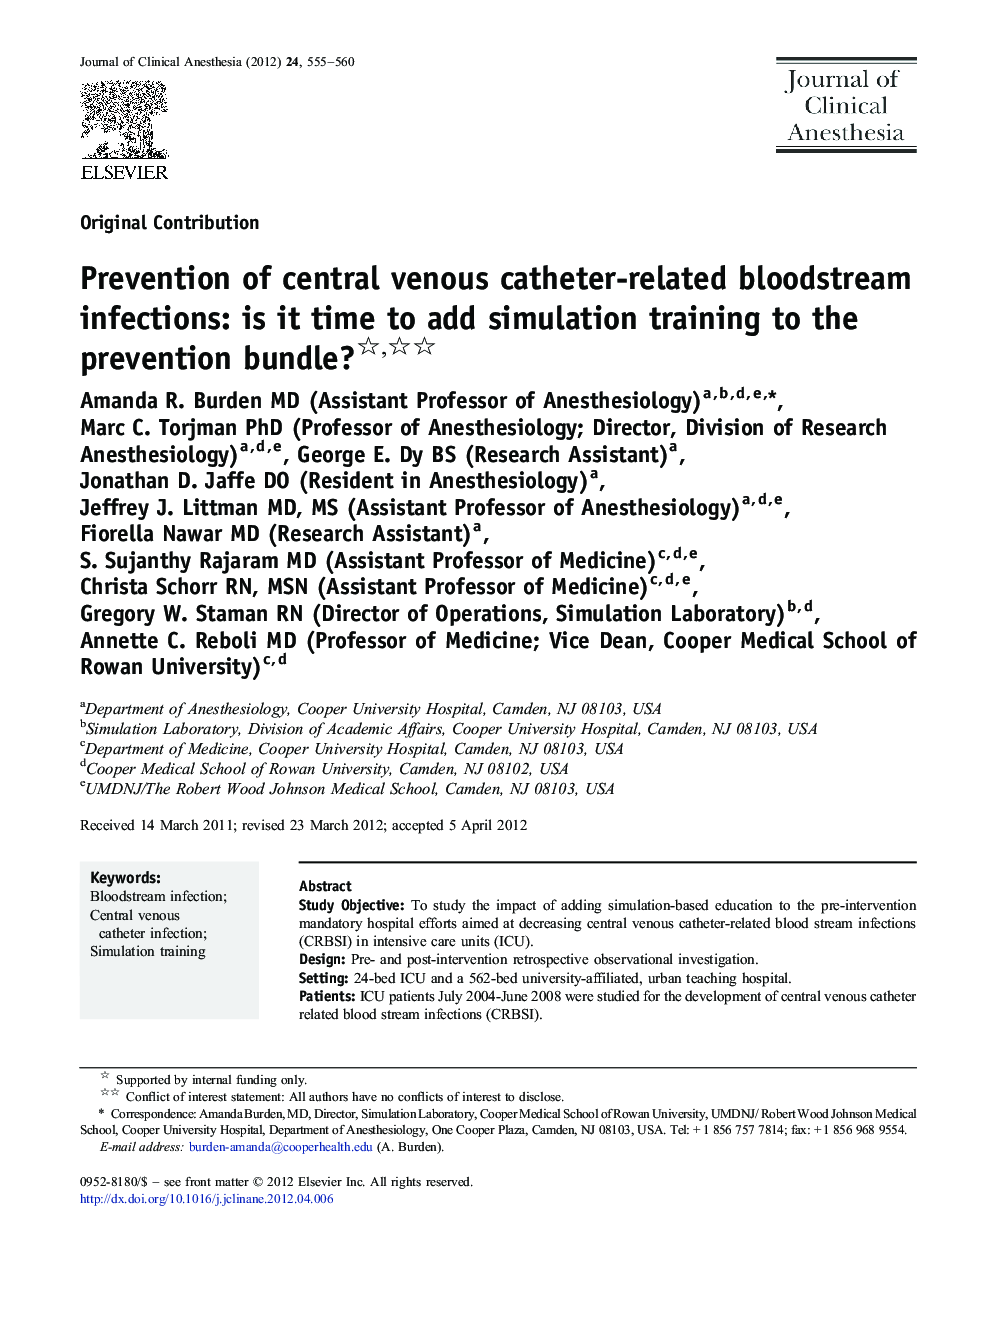 Prevention of central venous catheter-related bloodstream infections: is it time to add simulation training to the prevention bundle? 